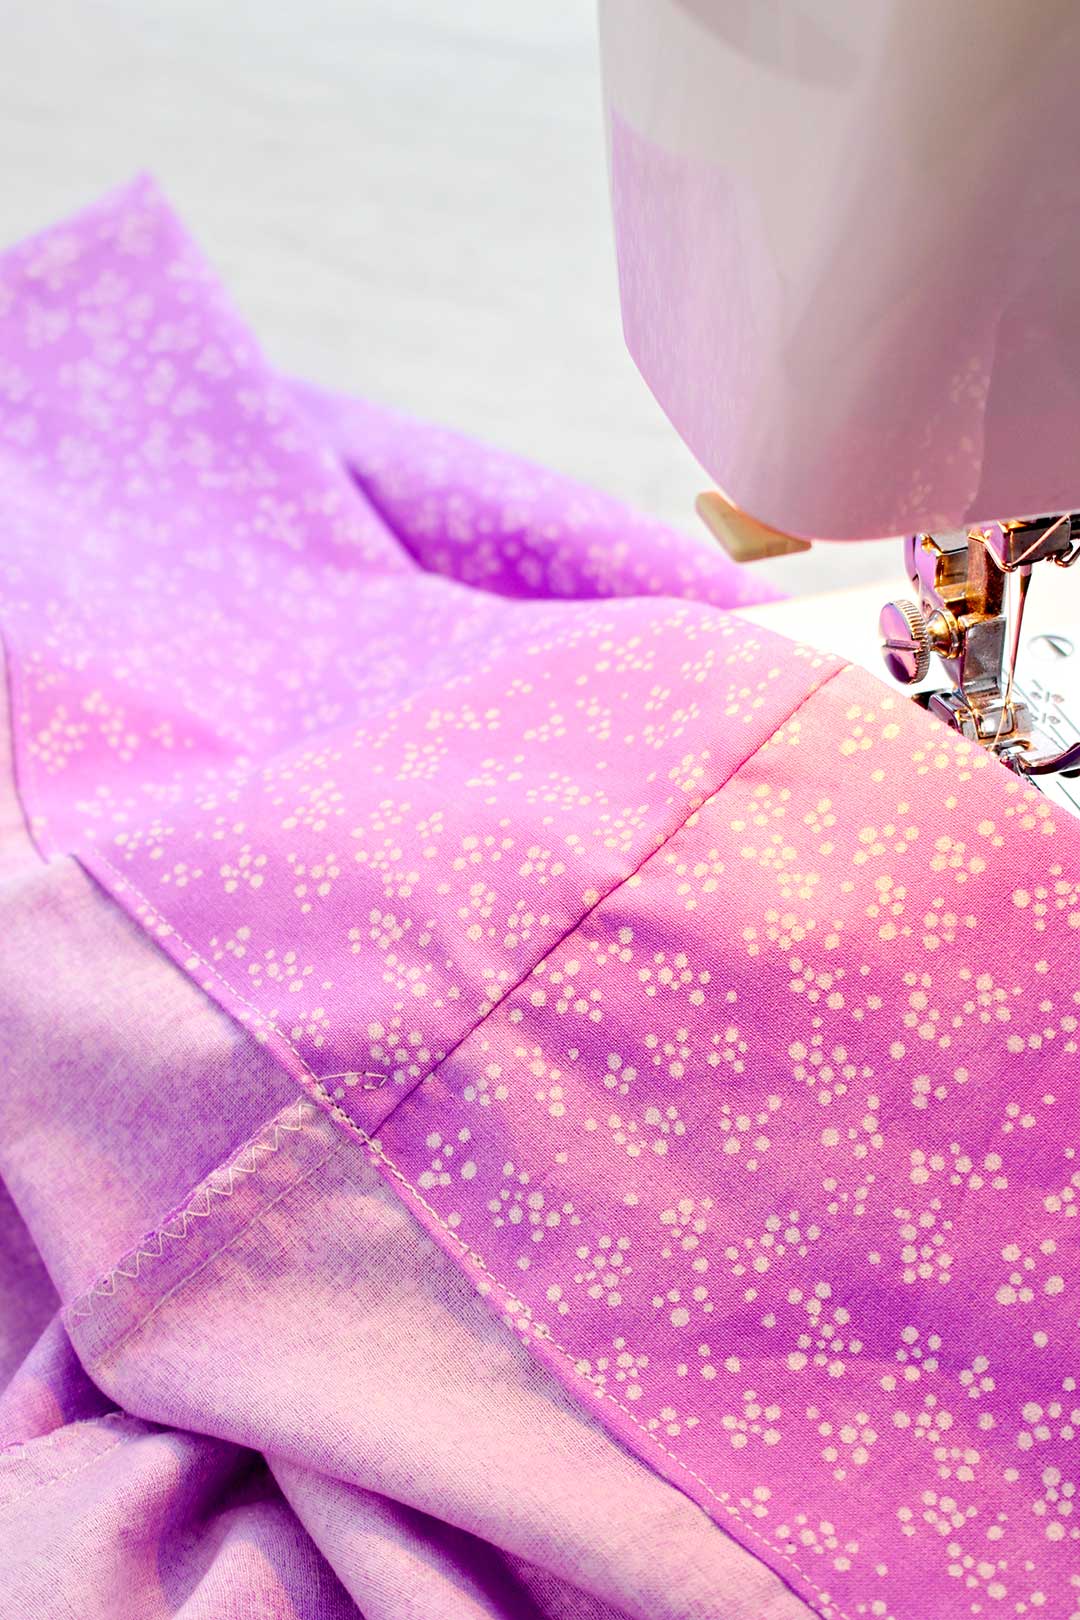 Close up image of the hemmed opening of the pillowcase near the sewing machine.